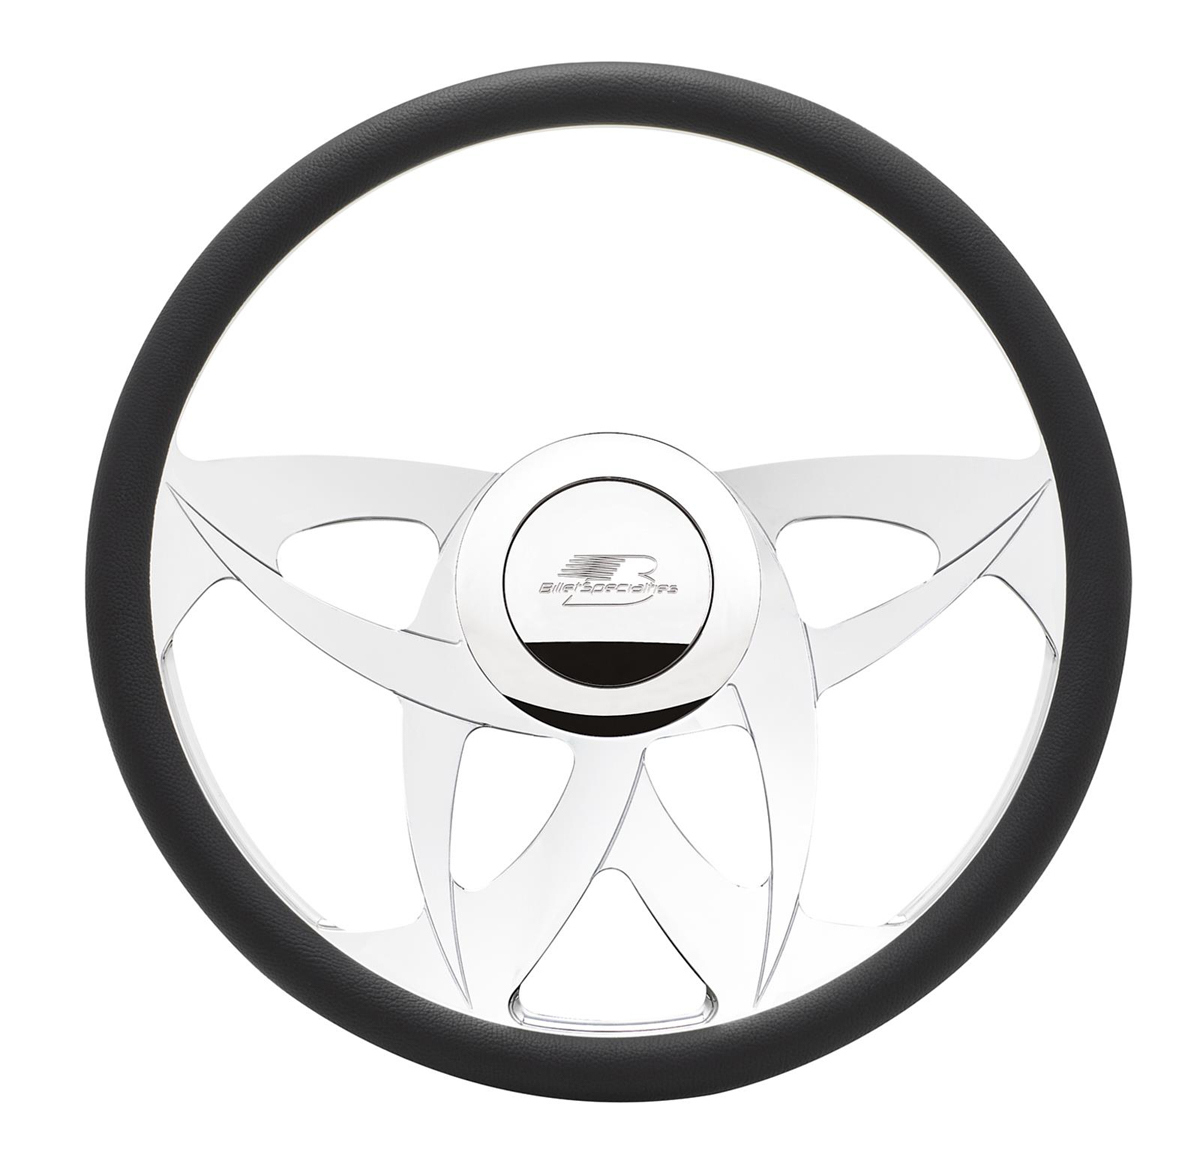 Billet Specialities 34152 Steering Wheel, Twinspin, 15-1/2 in Diameter, 2 in Dish, 4-Spoke, Milled Finger Notches, Aluminum, Polished, Each